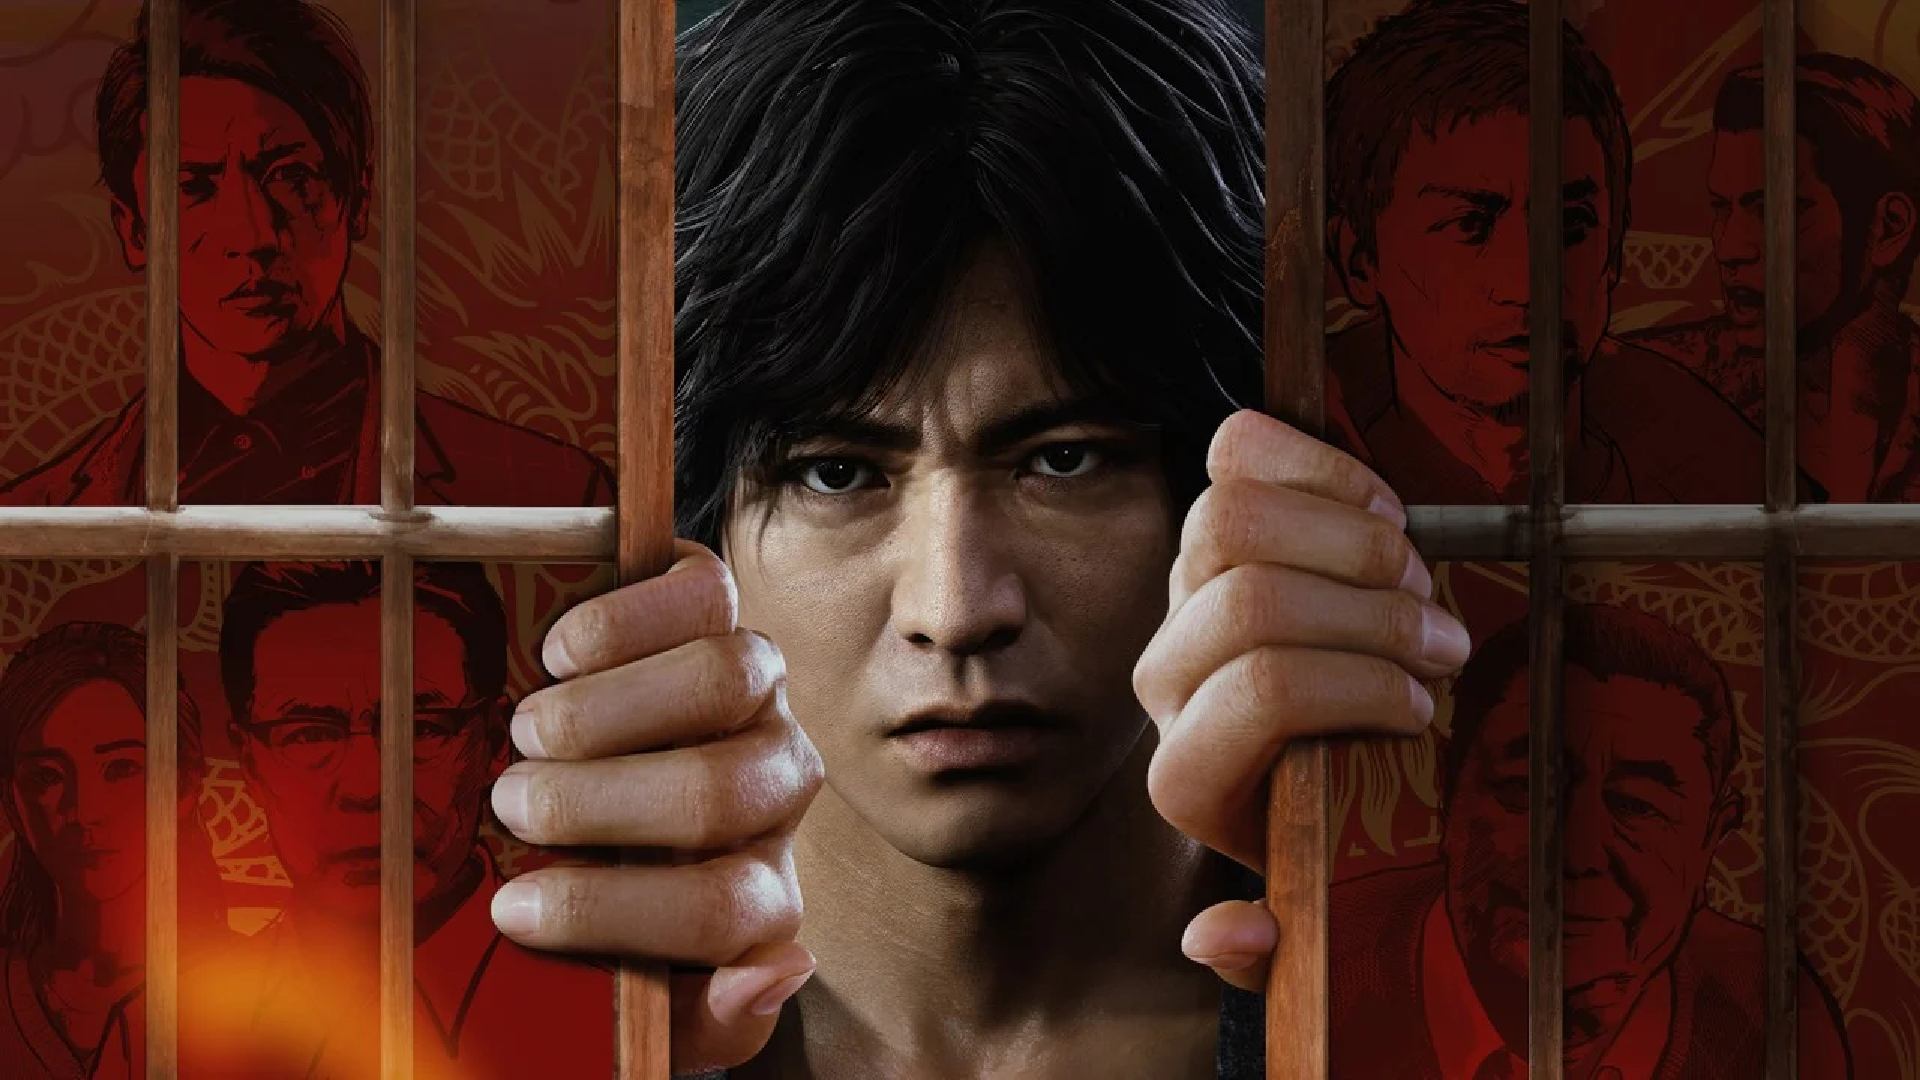 yagami can be seen peering through a gap in the game's key art.